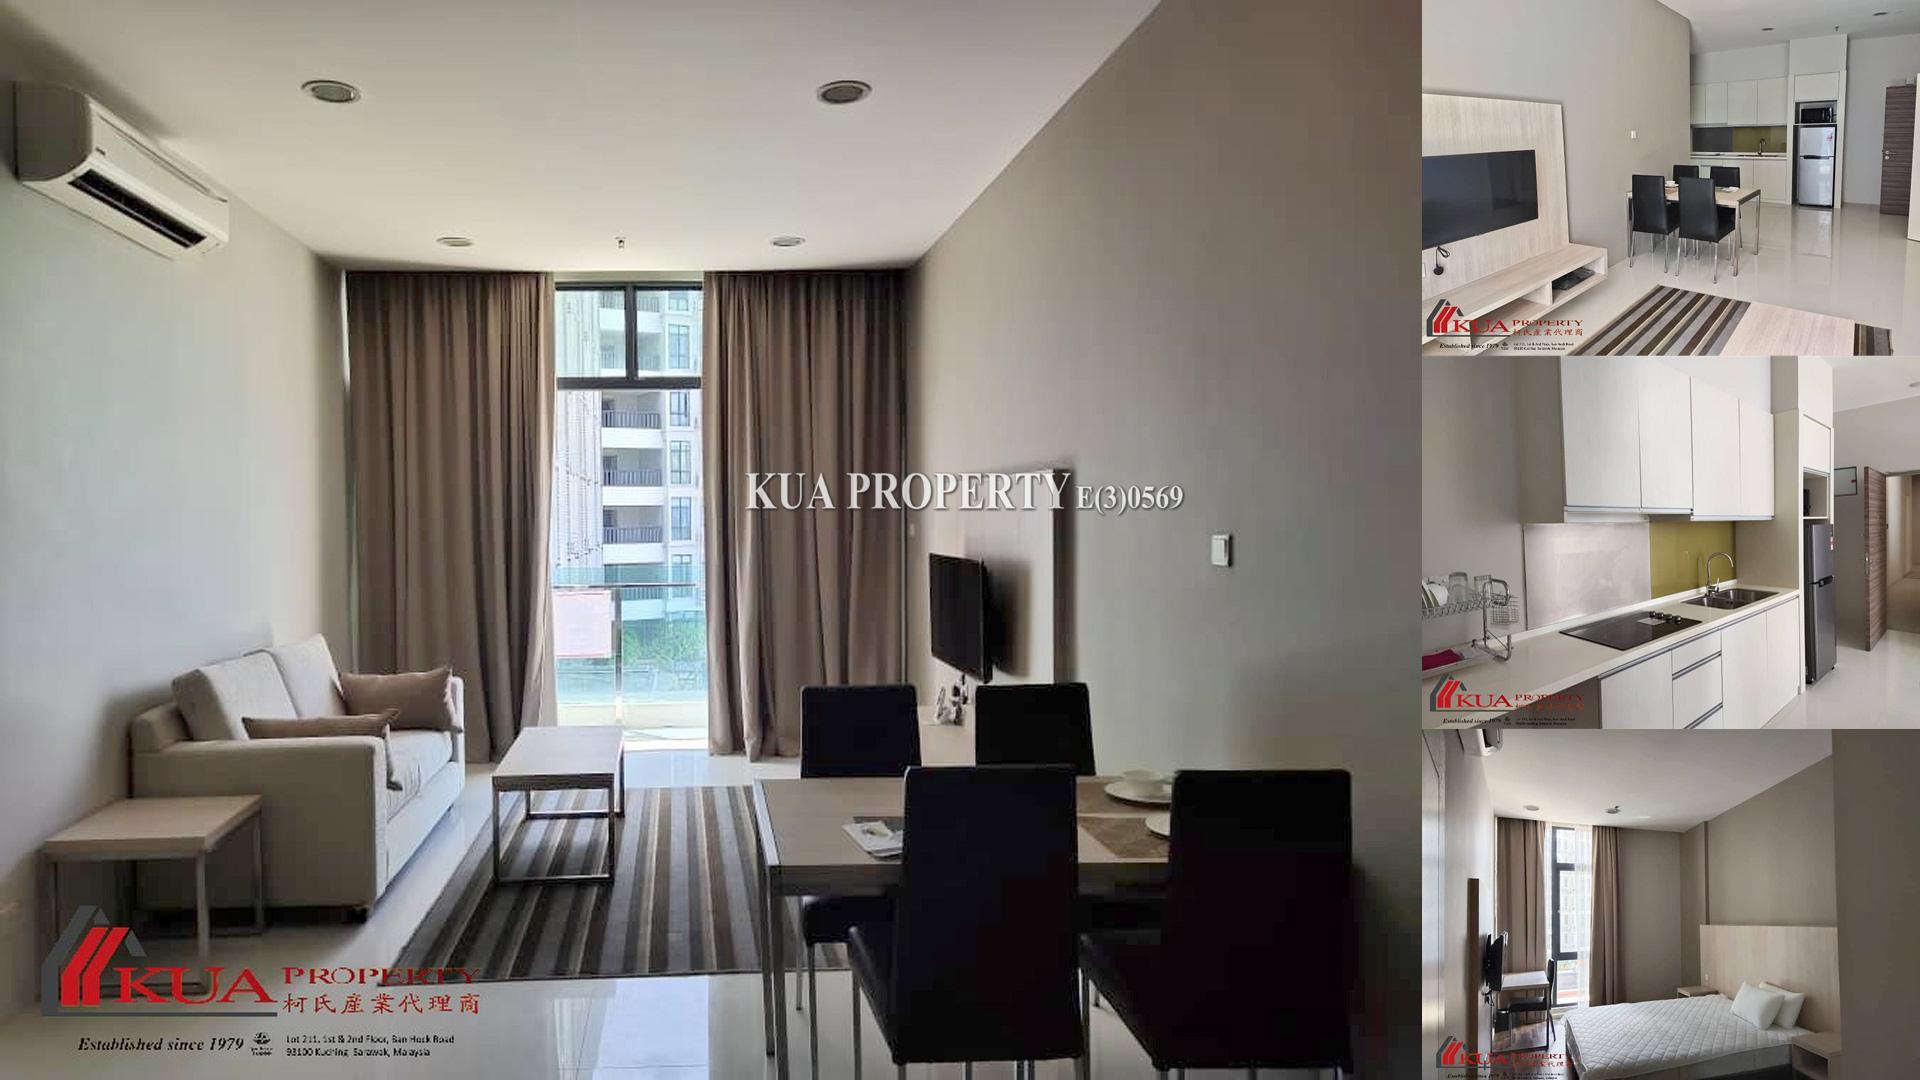 The Uplands Serviced Suites (Dual Key) For Sale! at Lorong Uplands, Simpang Tiga